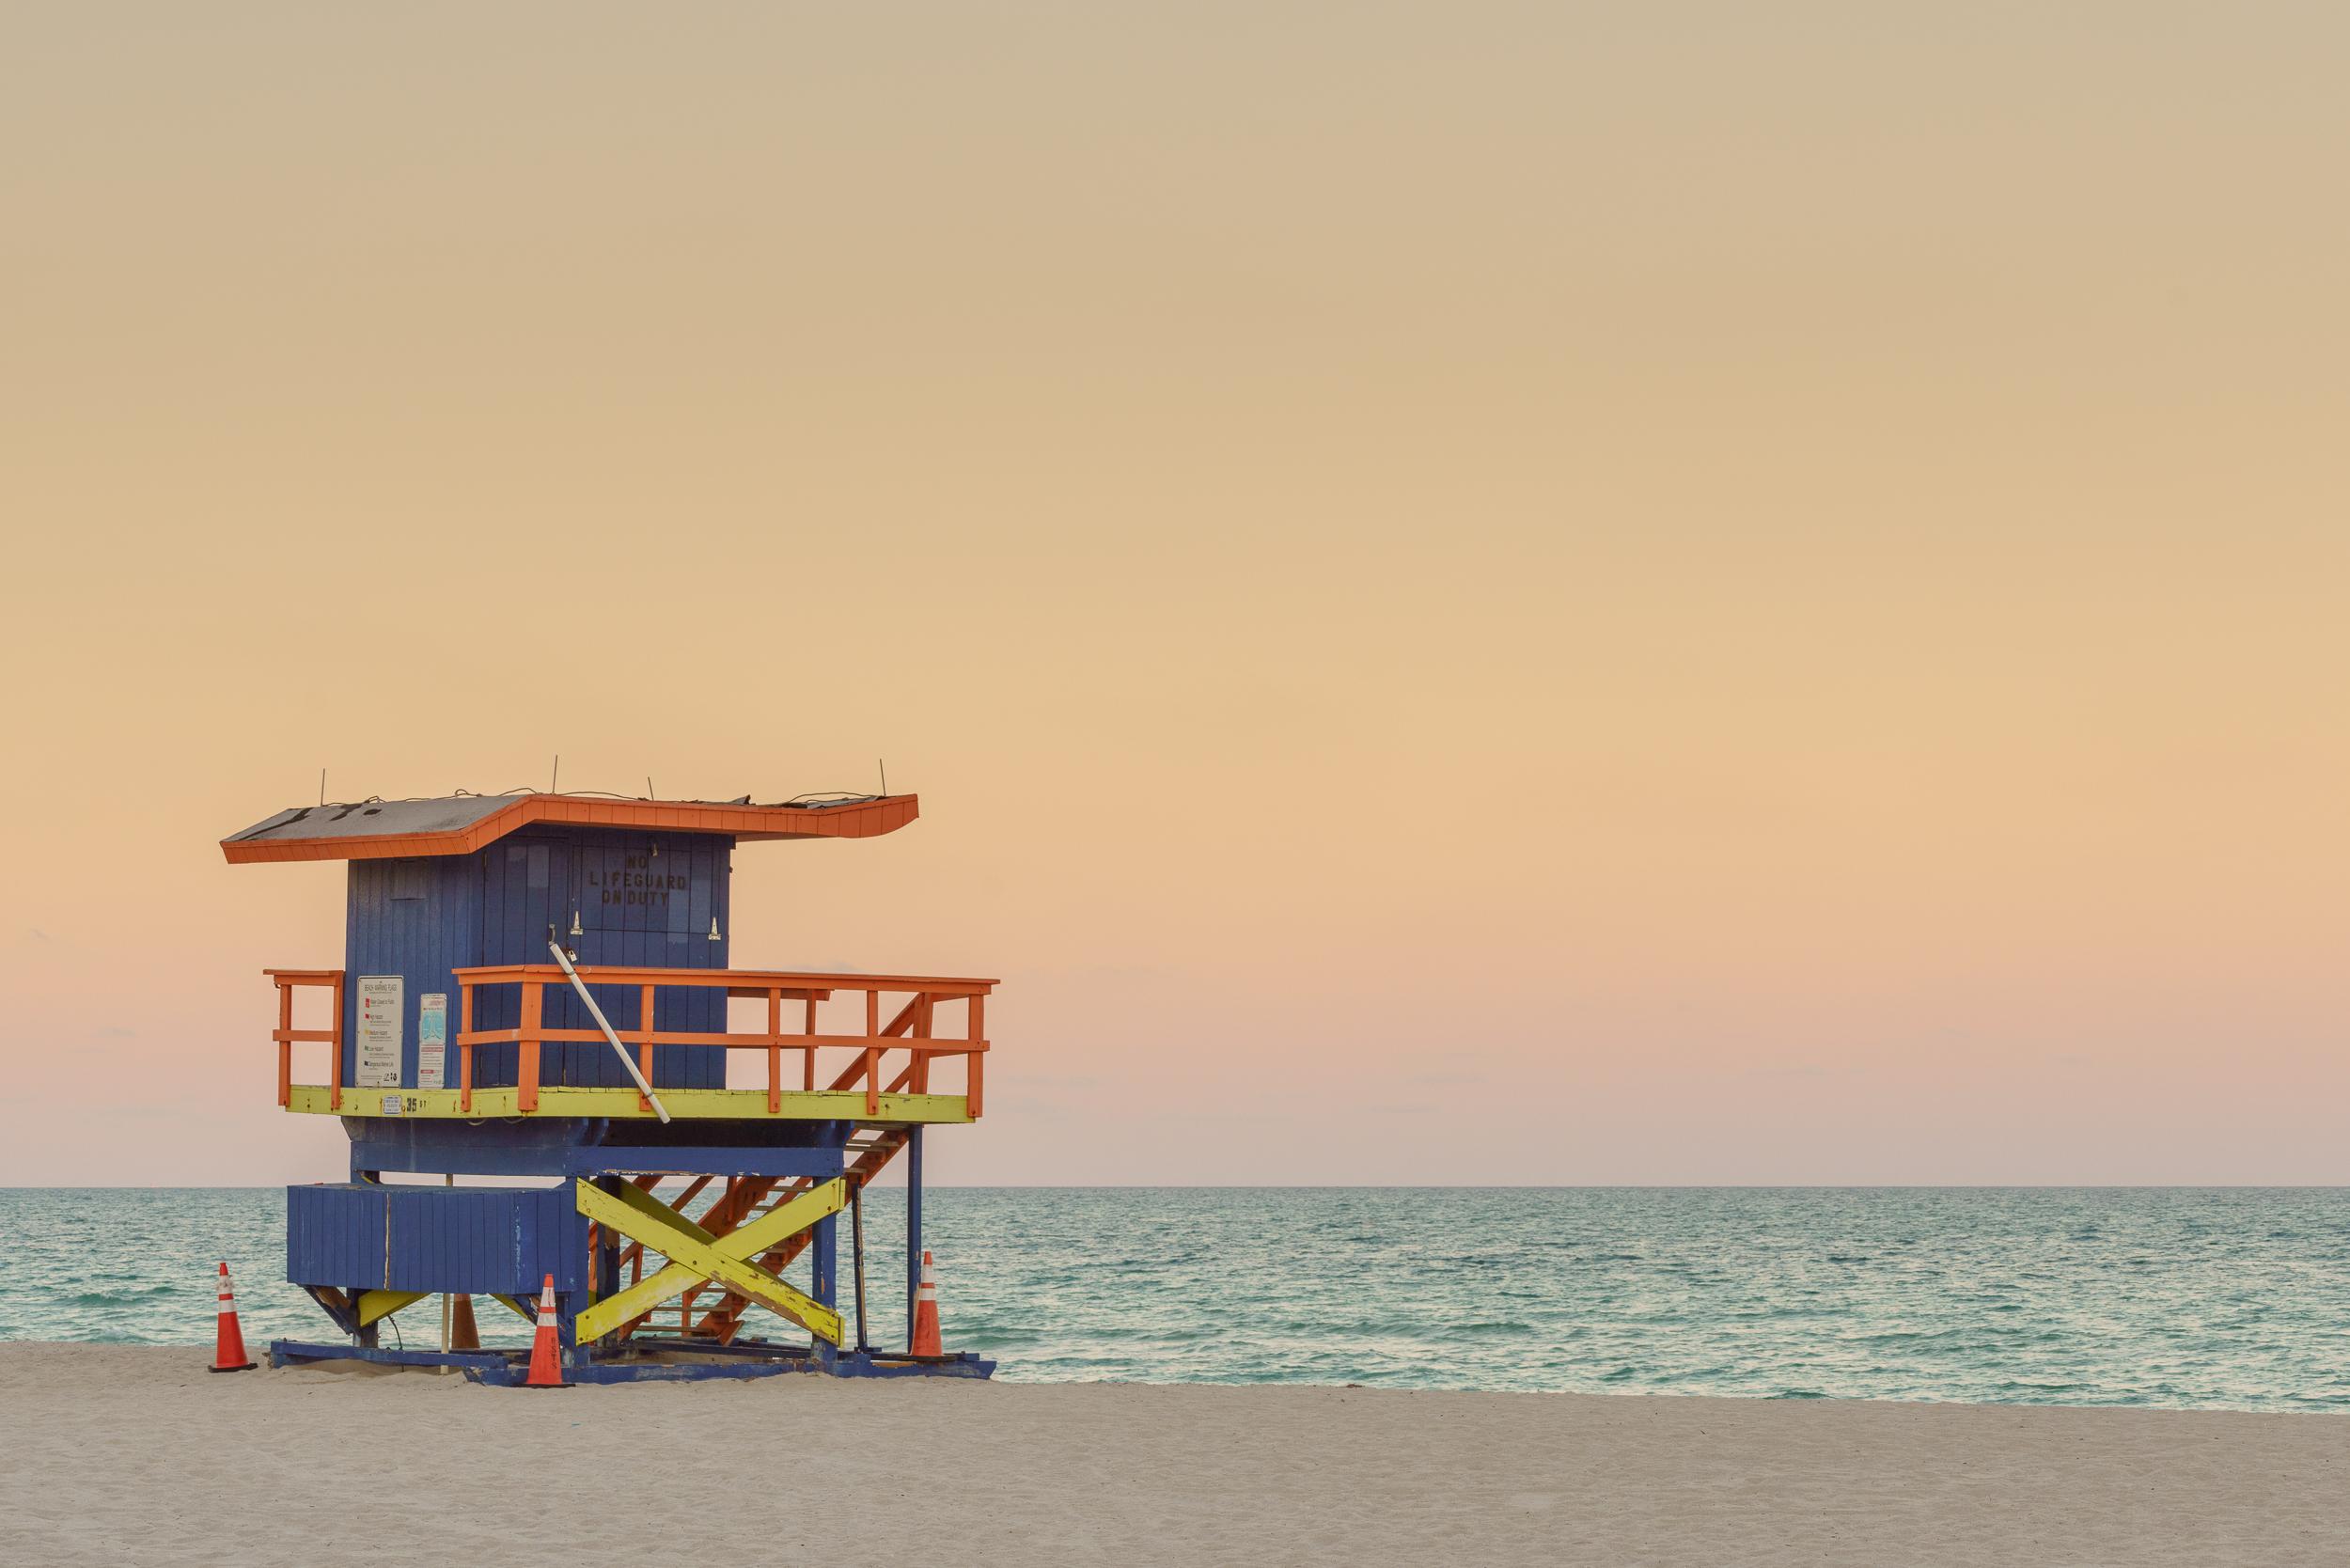 Peter Mendelson Landscape Photograph - "35th St. Miami Lifeguard Stand at Sunset, " Contemporary Photograph, 40" x 60"